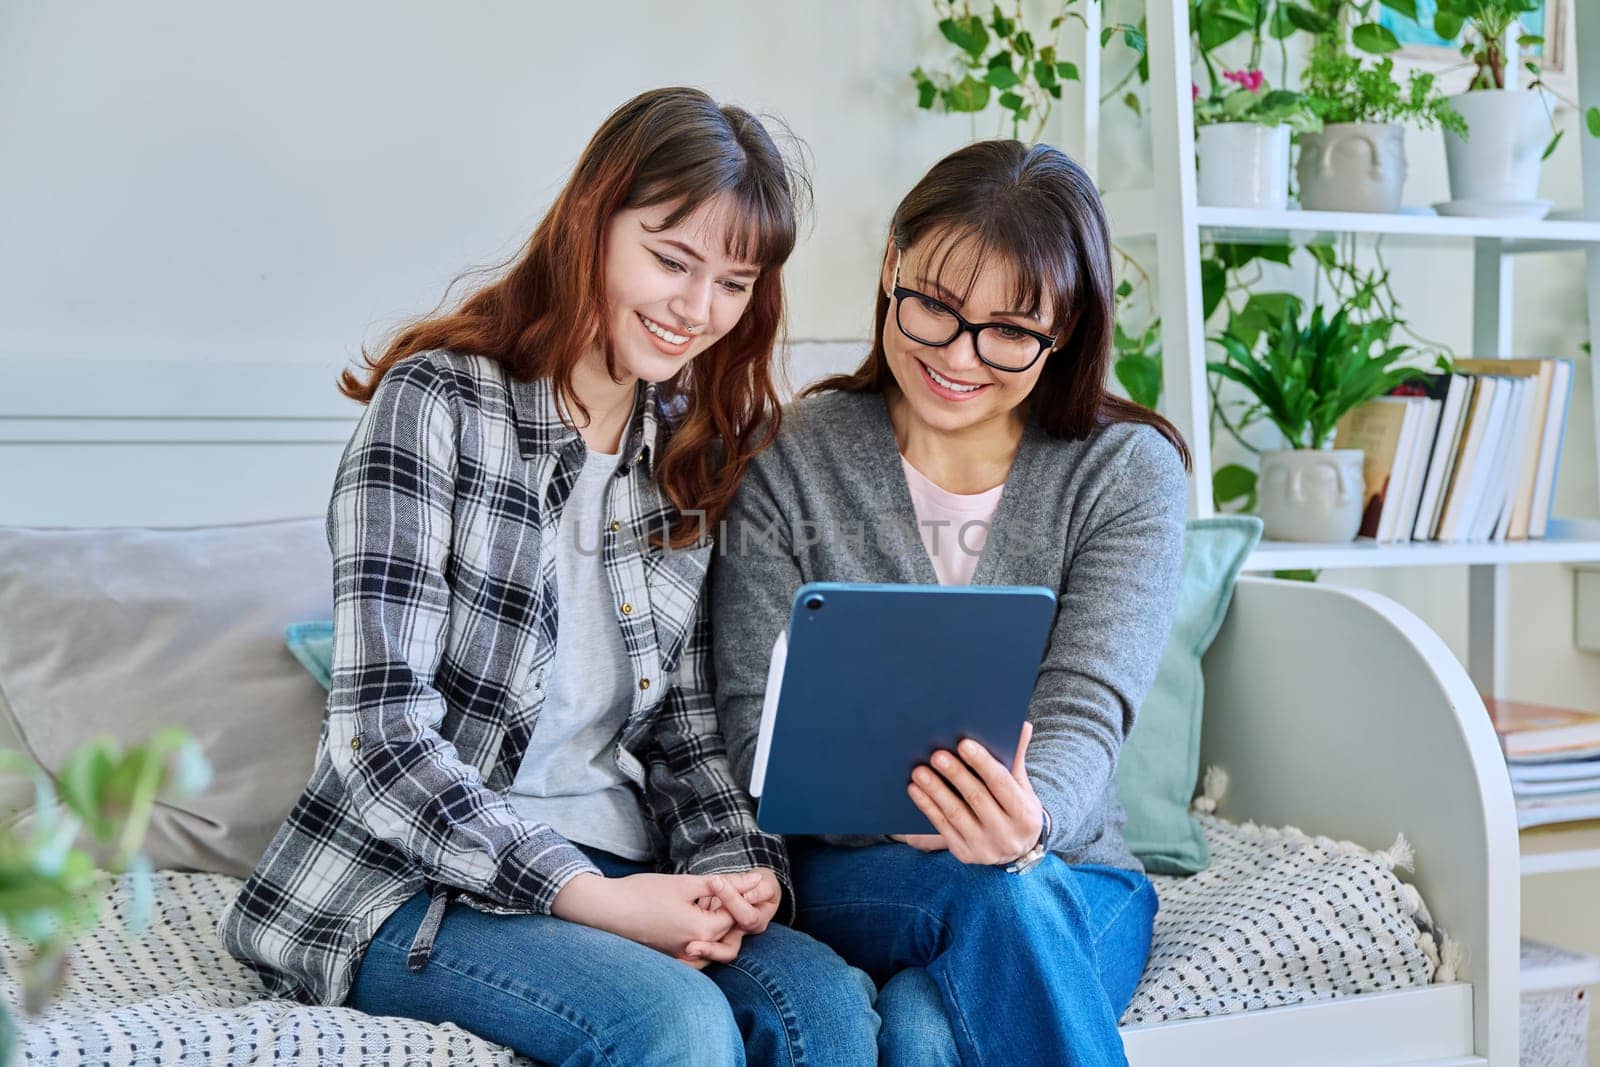 Happy talking laughing mother and teenage daughter looking together at screen of digital tablet gadget. Communication leisure shopping together watching videos chat social networks. Family friendship